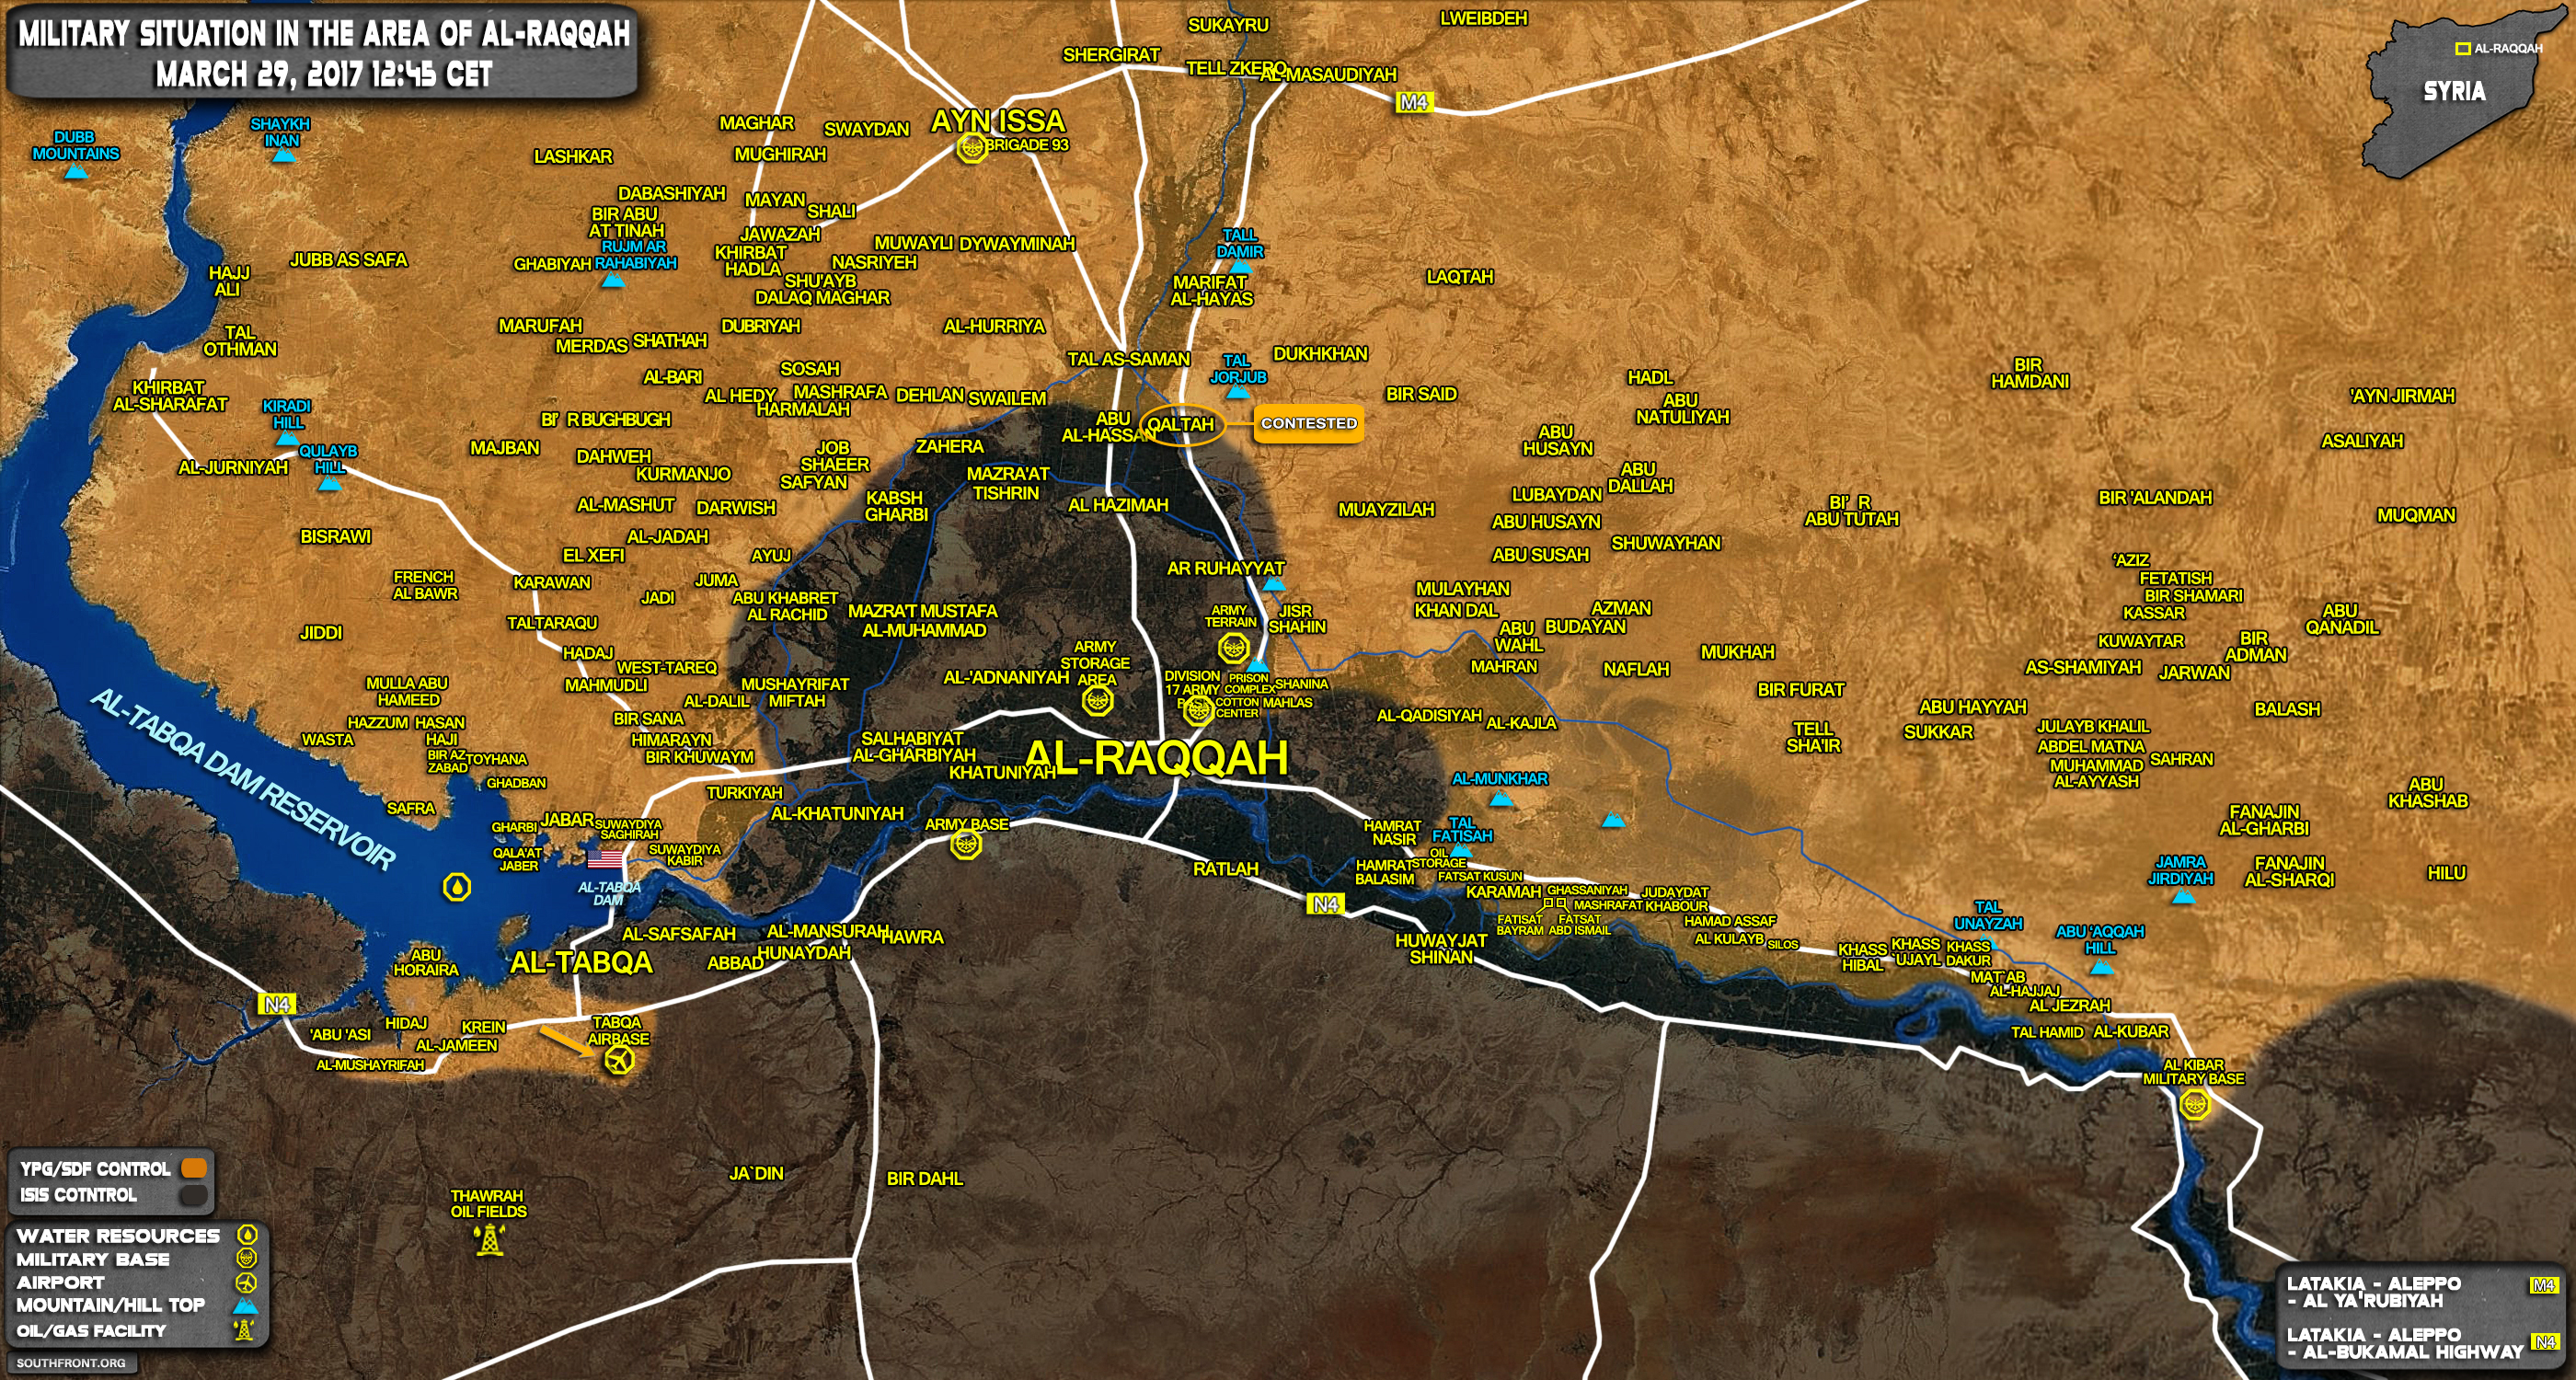 Military Situation In Area Of Raqqah On March 29, 2017 (Syria Map Update)